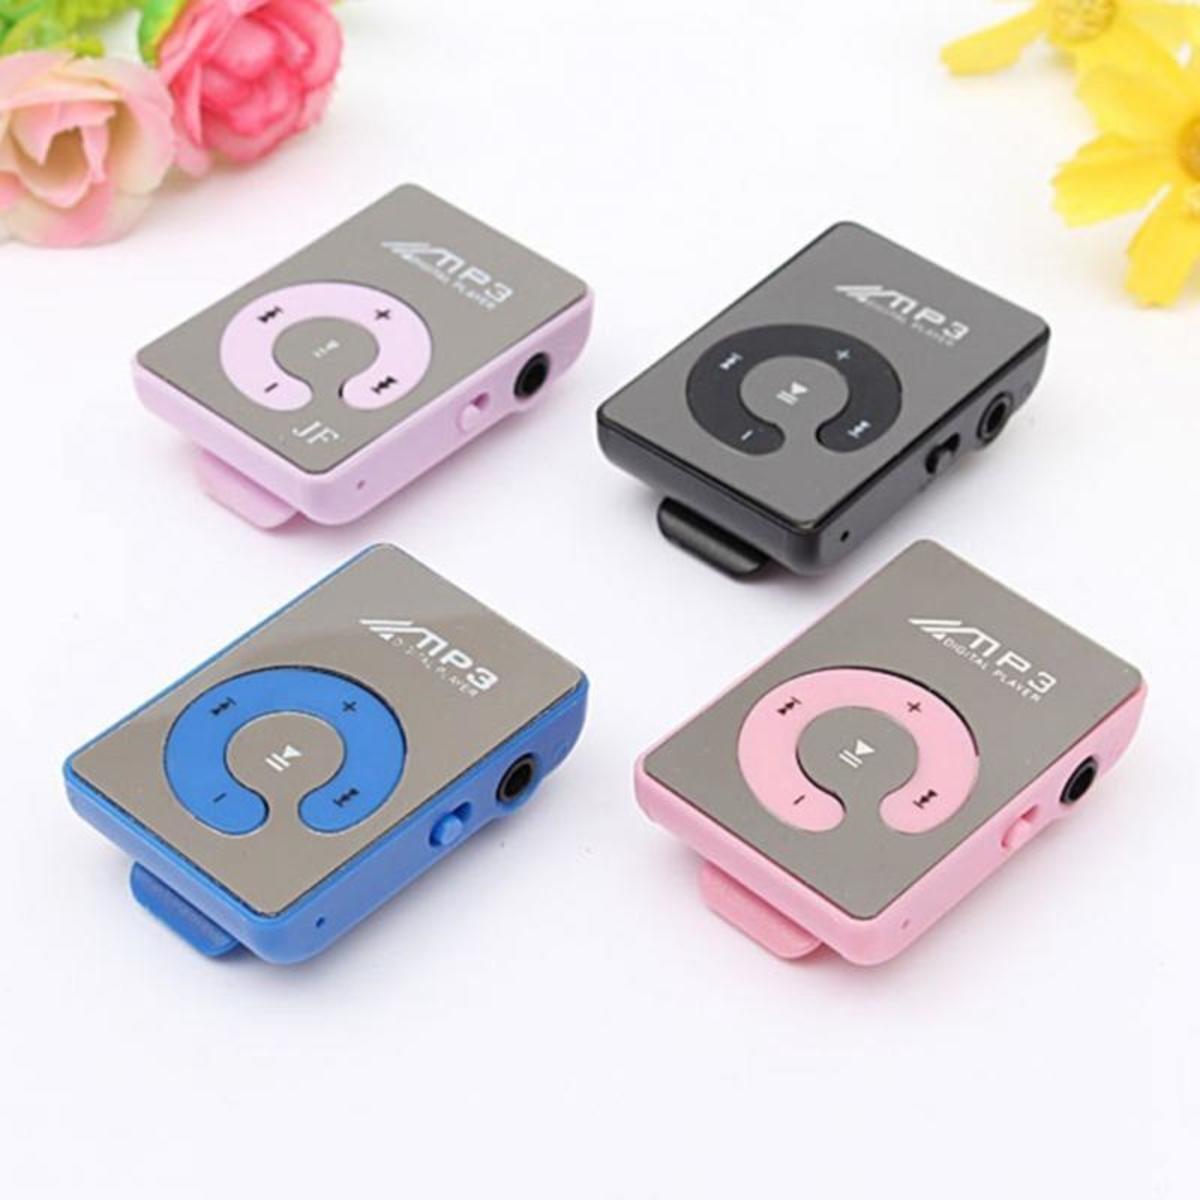 Upgraded mini-clip music players.